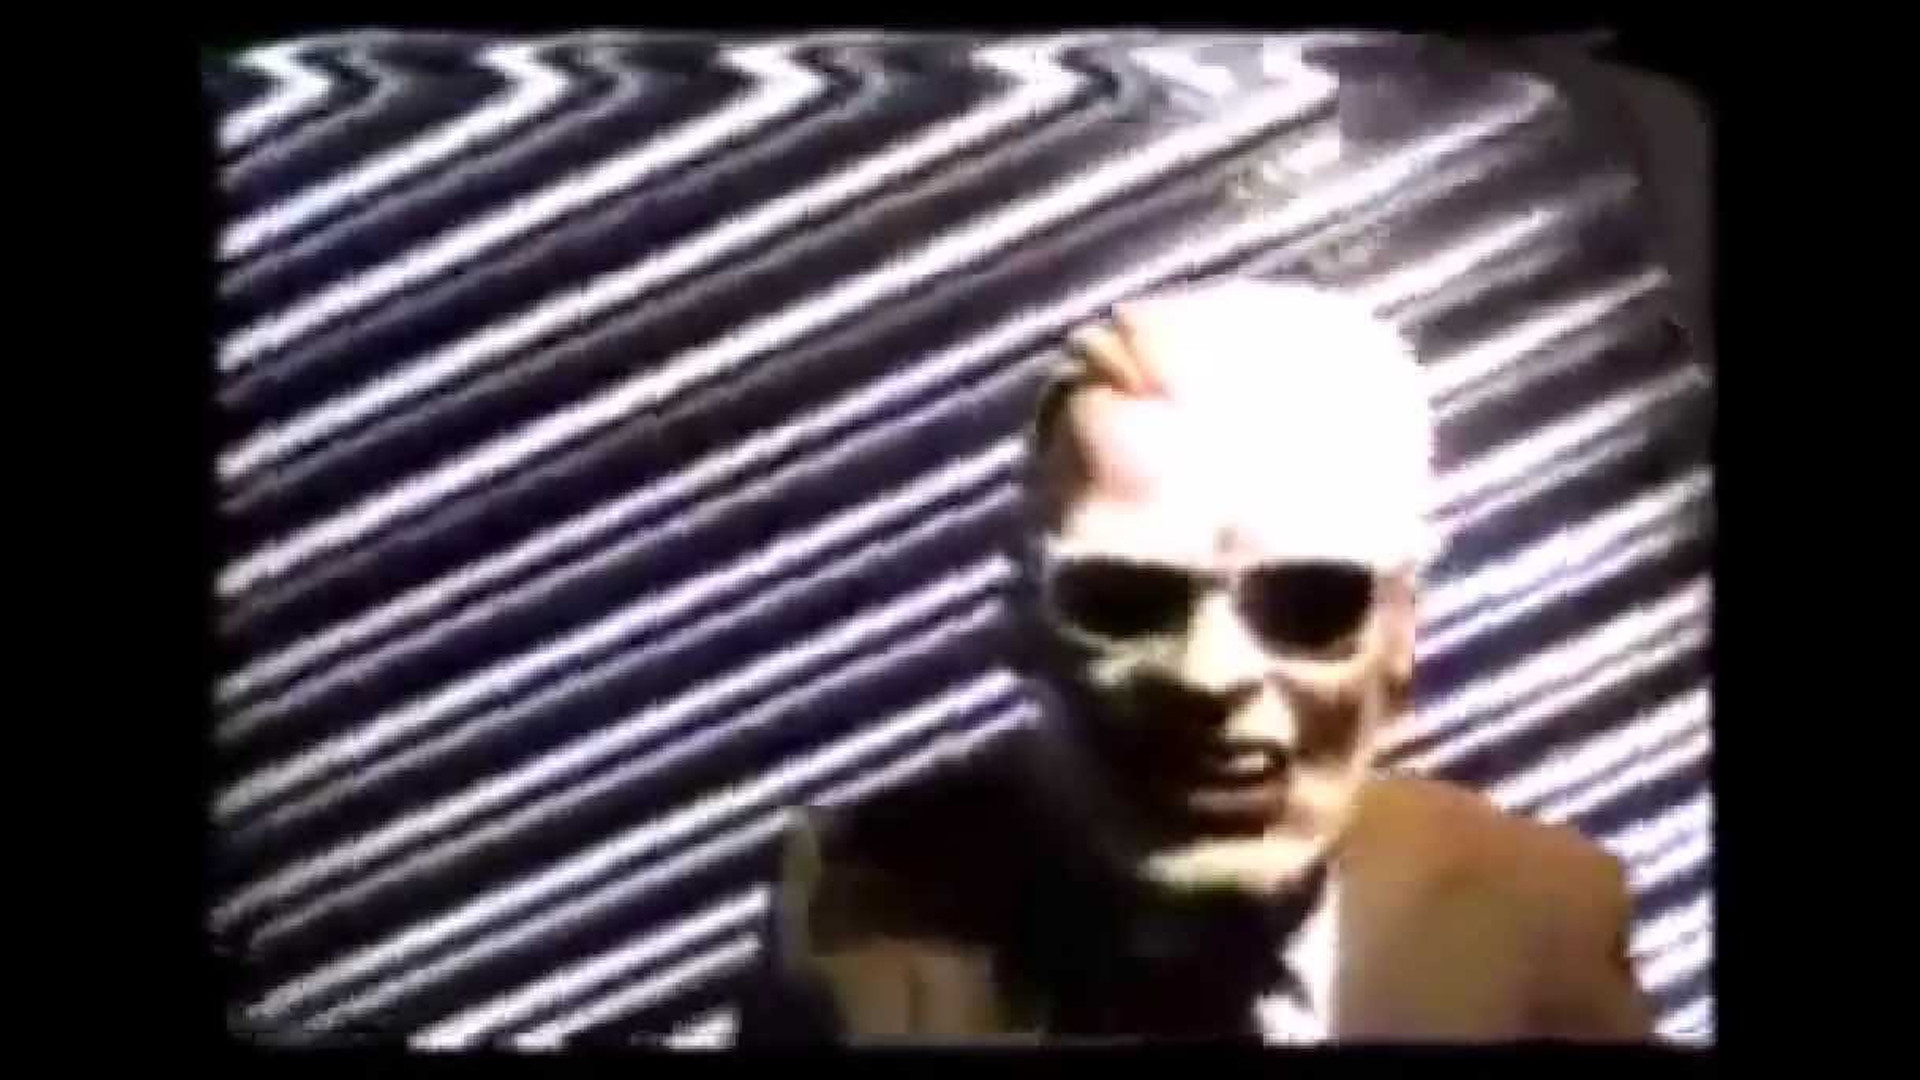 1920x1080 Image: http://riotfest.org/wp-content/uploads/2016/11/max-headroom-wttw.jpg